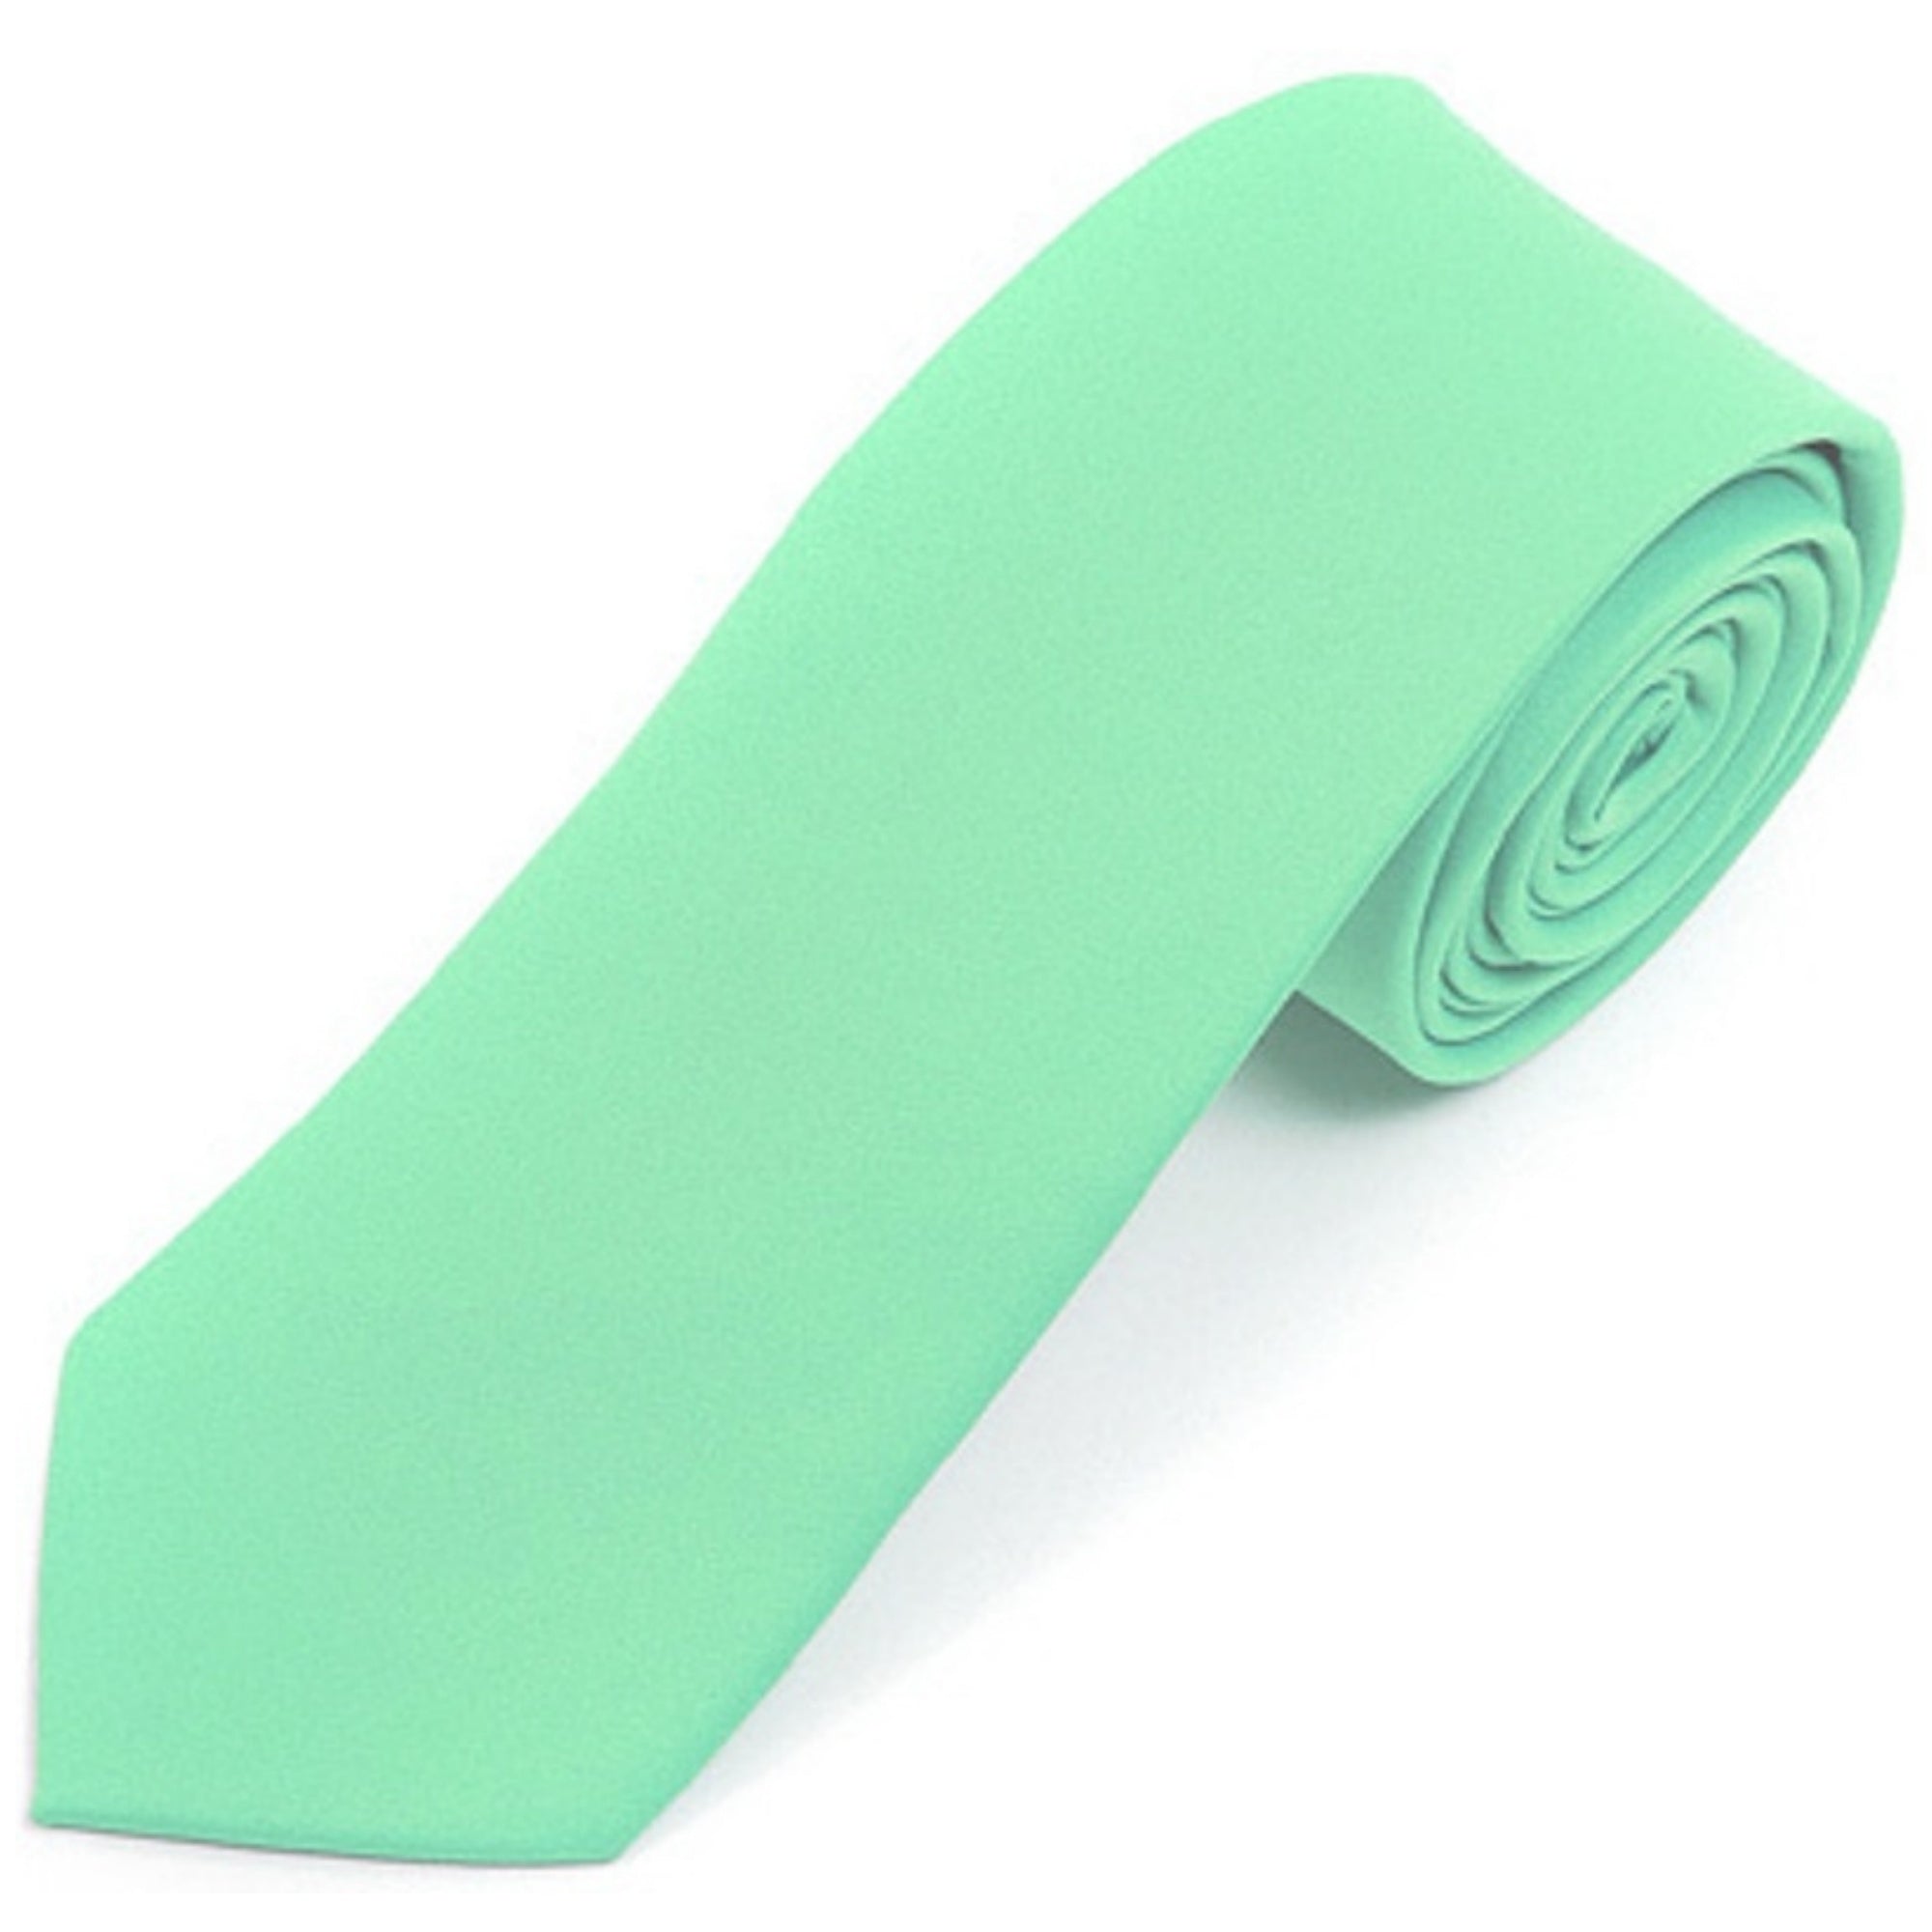 Men's Solid Color 2 Inch Wide And 57 Inch Long Slim Neckties Neck Tie TheDapperTie Mint 57" long and 2" wide 